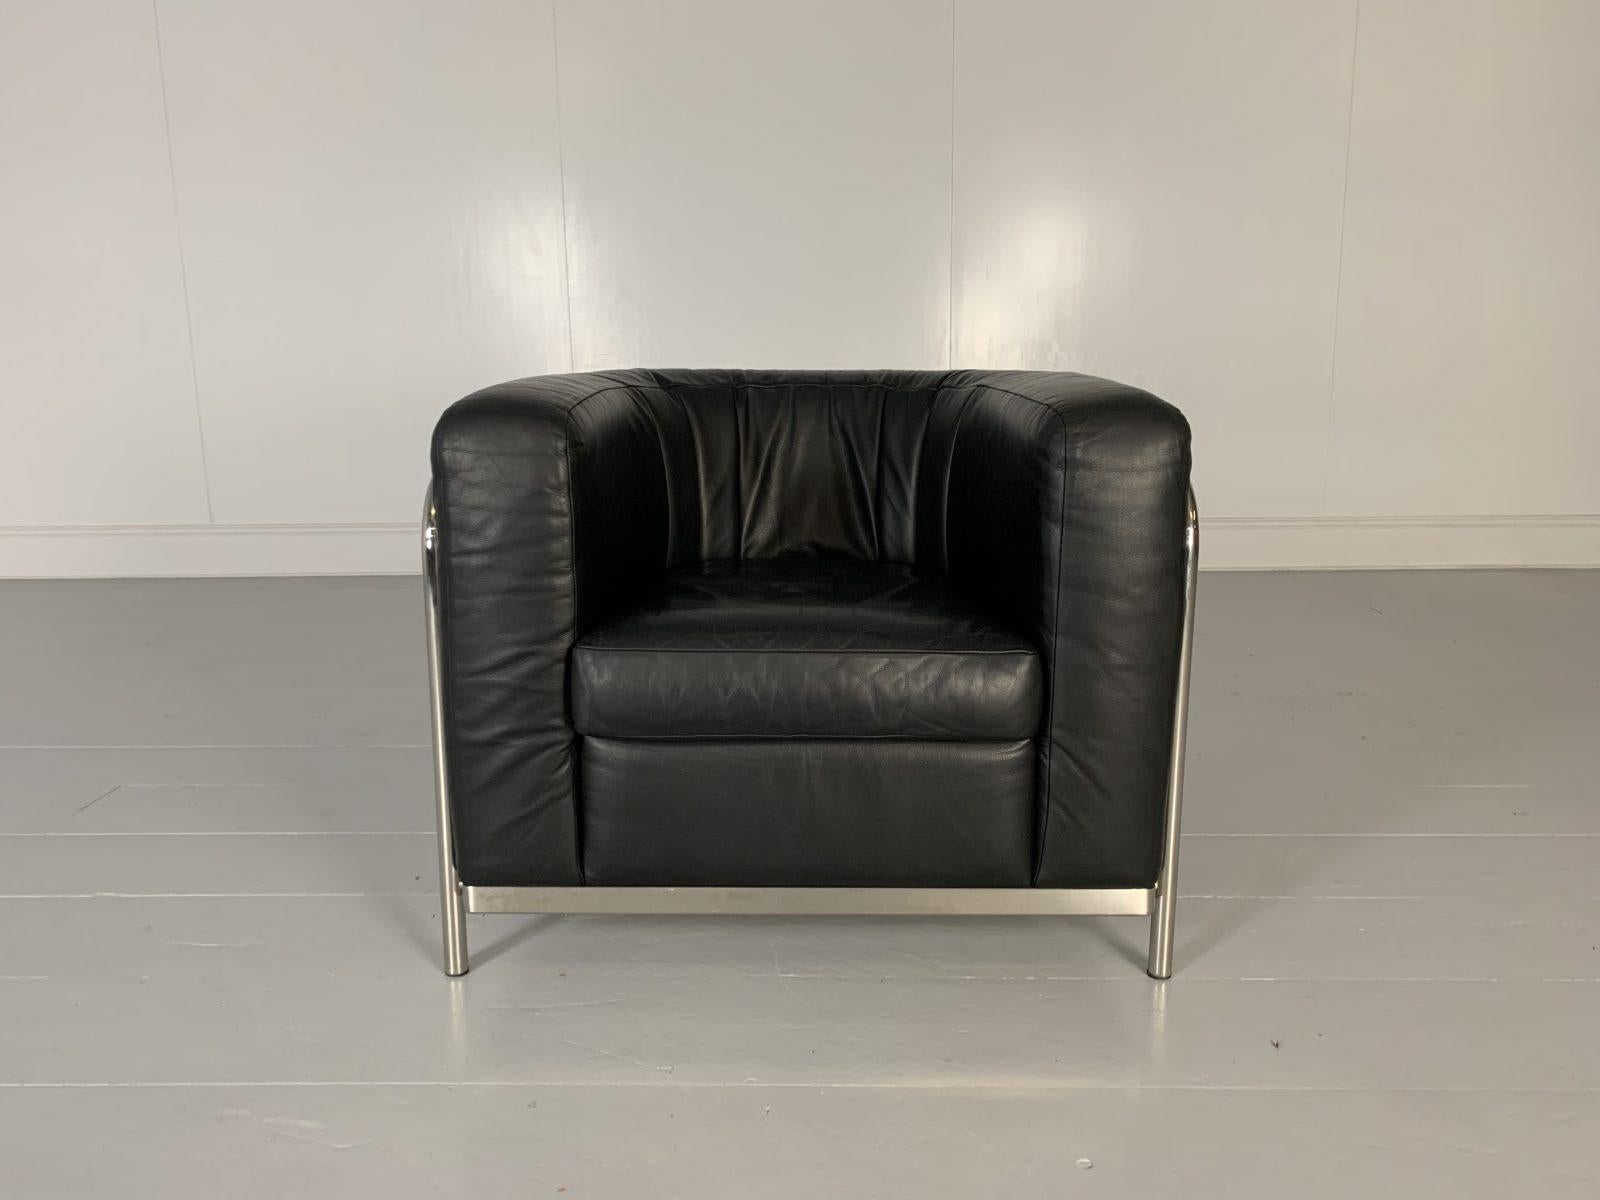 On offer on this occasion is a rare, immaculately presented “Onda” Armchair from the world renown Italian furniture house of Zanotta, dressed in their legendary, incomparable “Scozia” Leather in Jet-Black, and with a polished-chrome frame.

As you